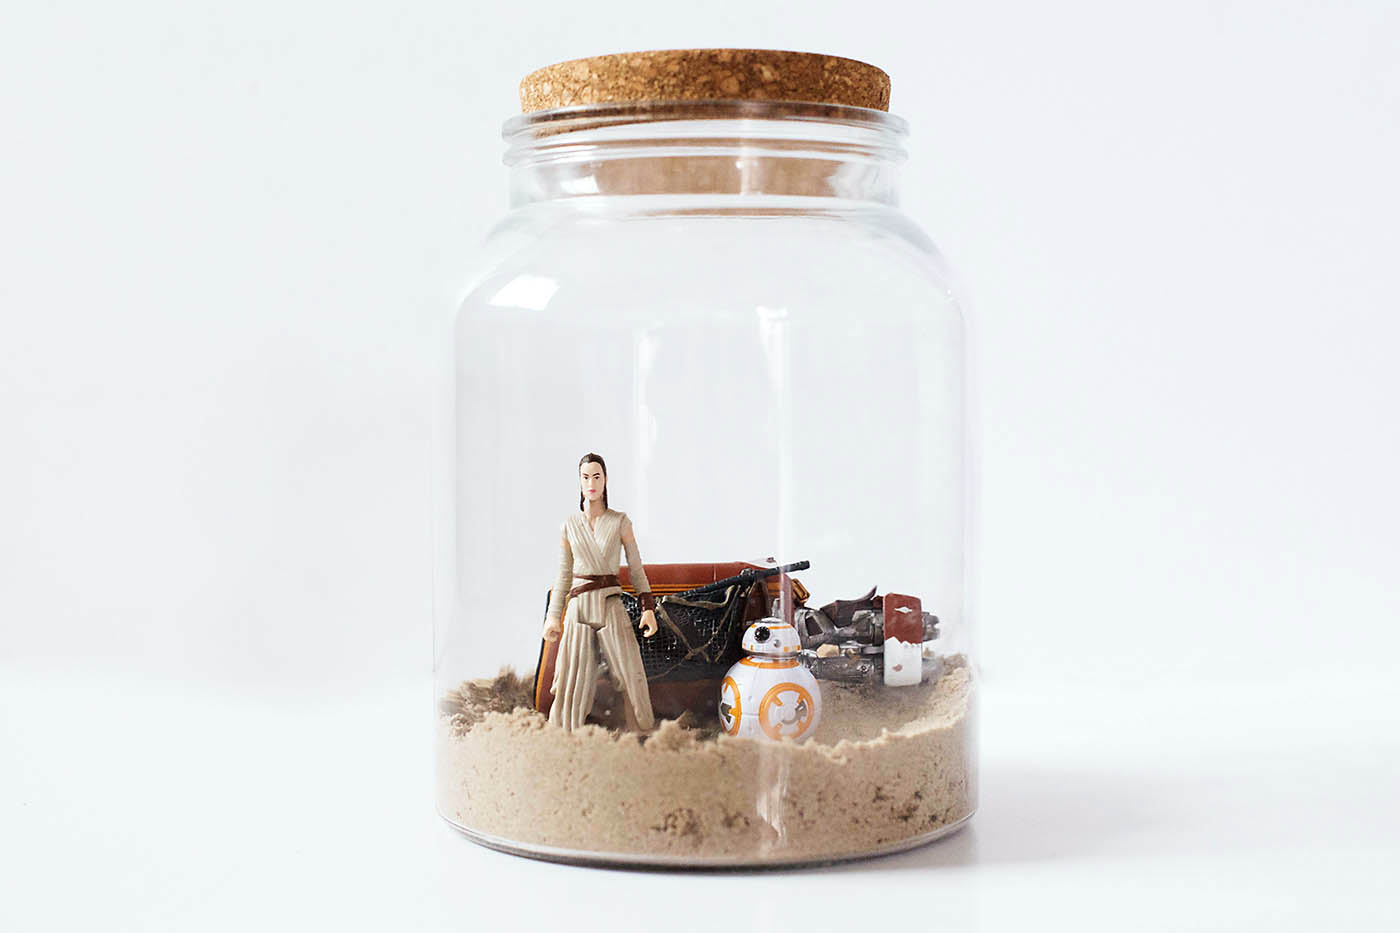 DIY Star Wars and other themed terrariums